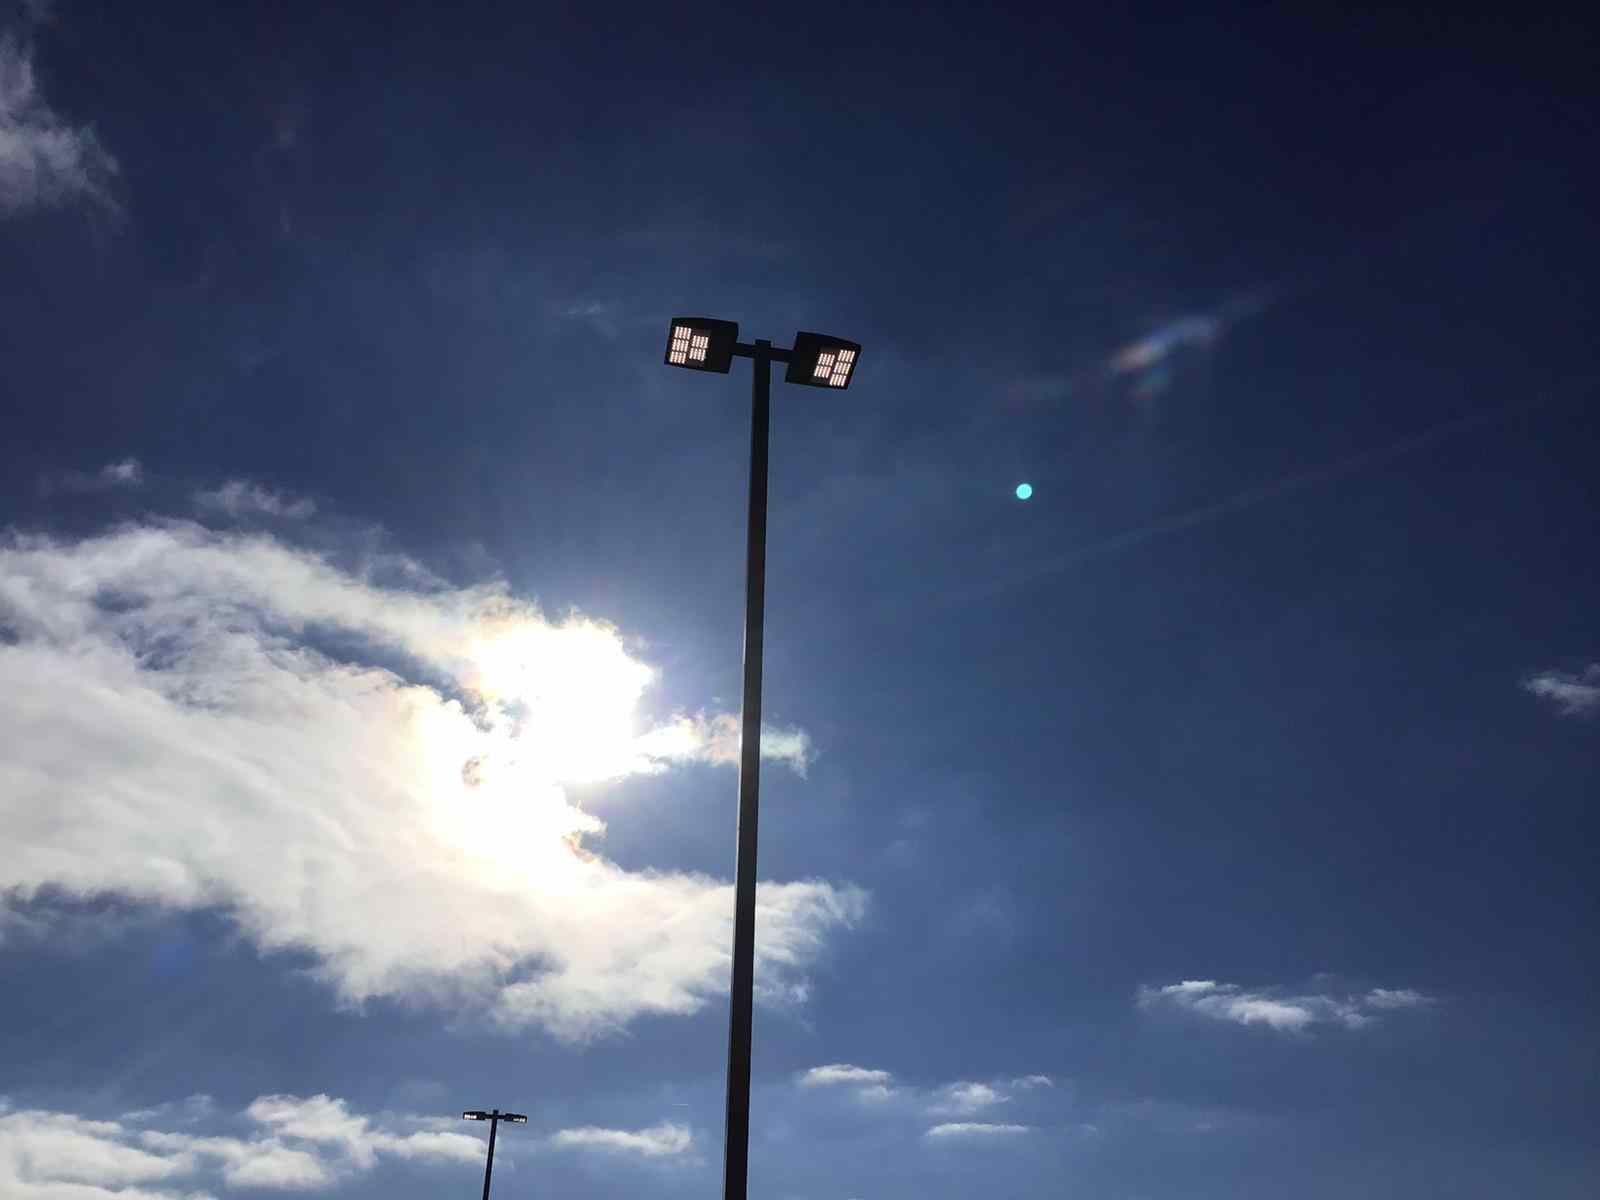 A street light against a blue sky with clouds and the sun shining through the clouds.